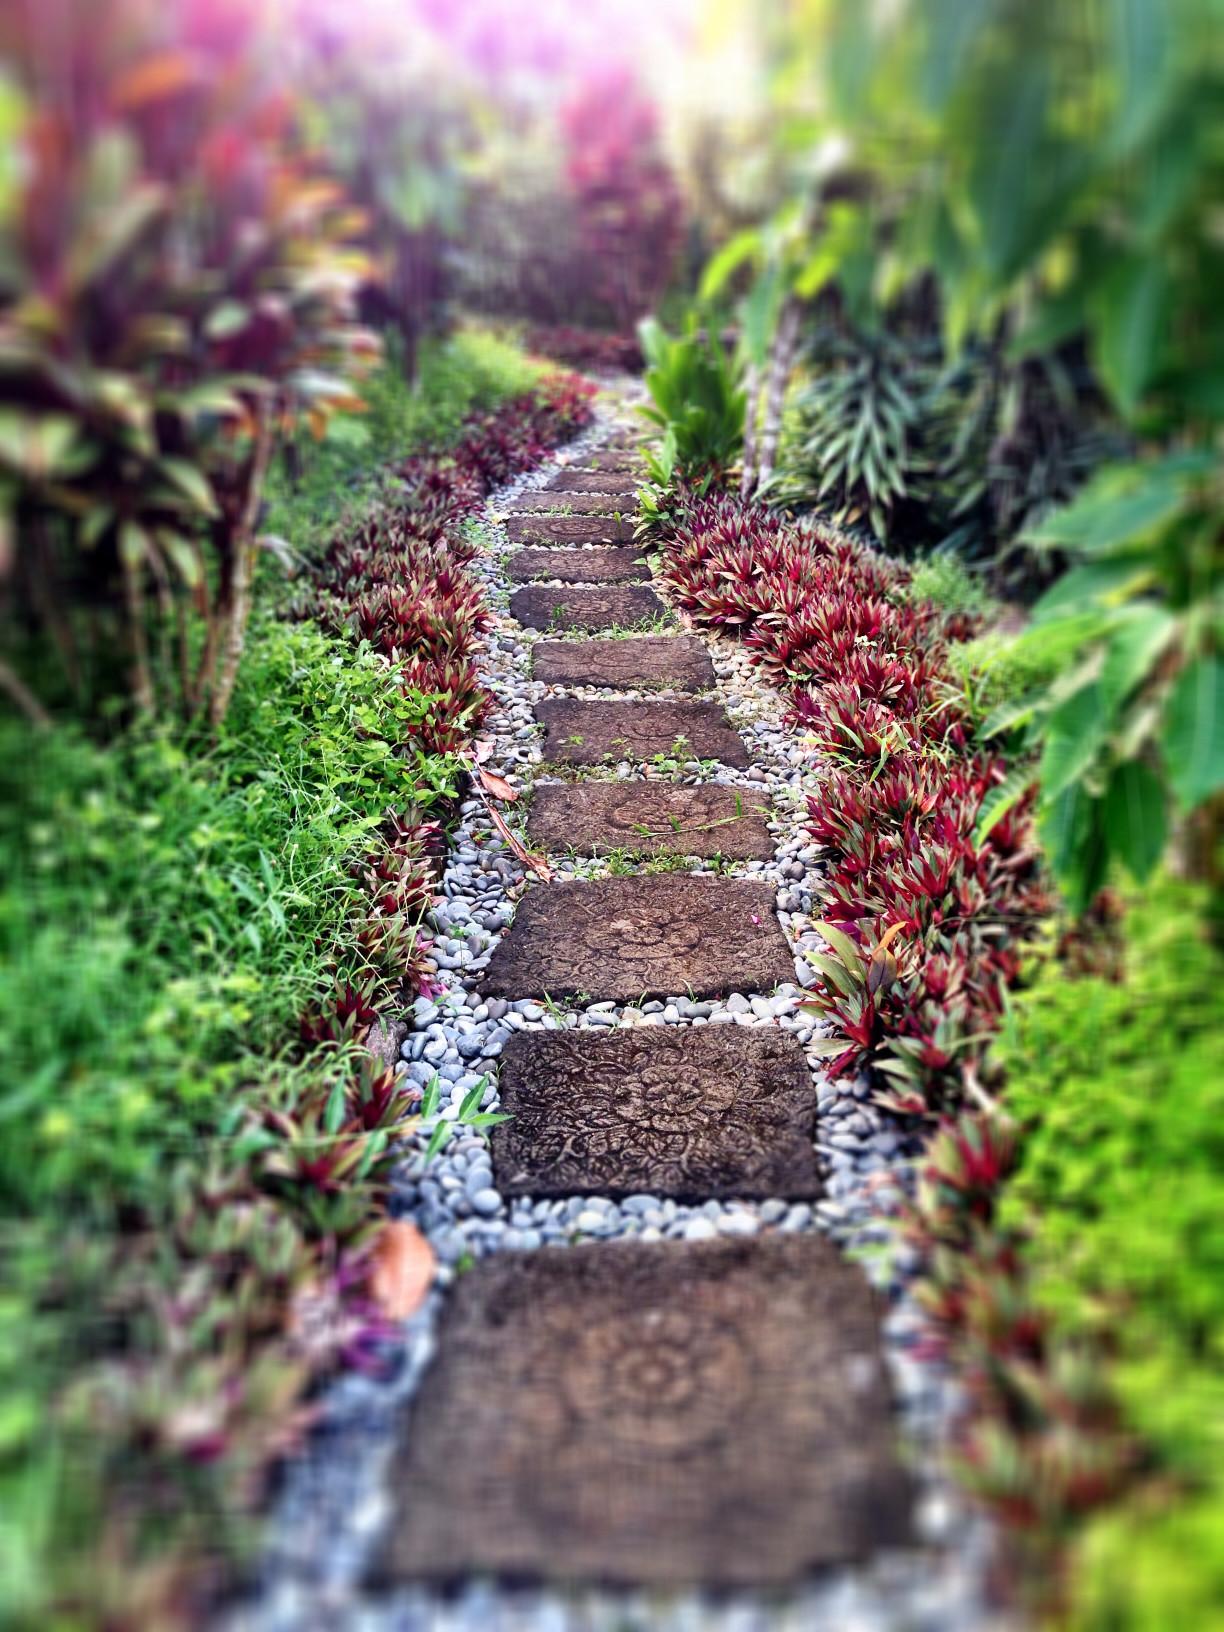 White and gray pebble path with brown flat stones set on top, lush garden surrounding.